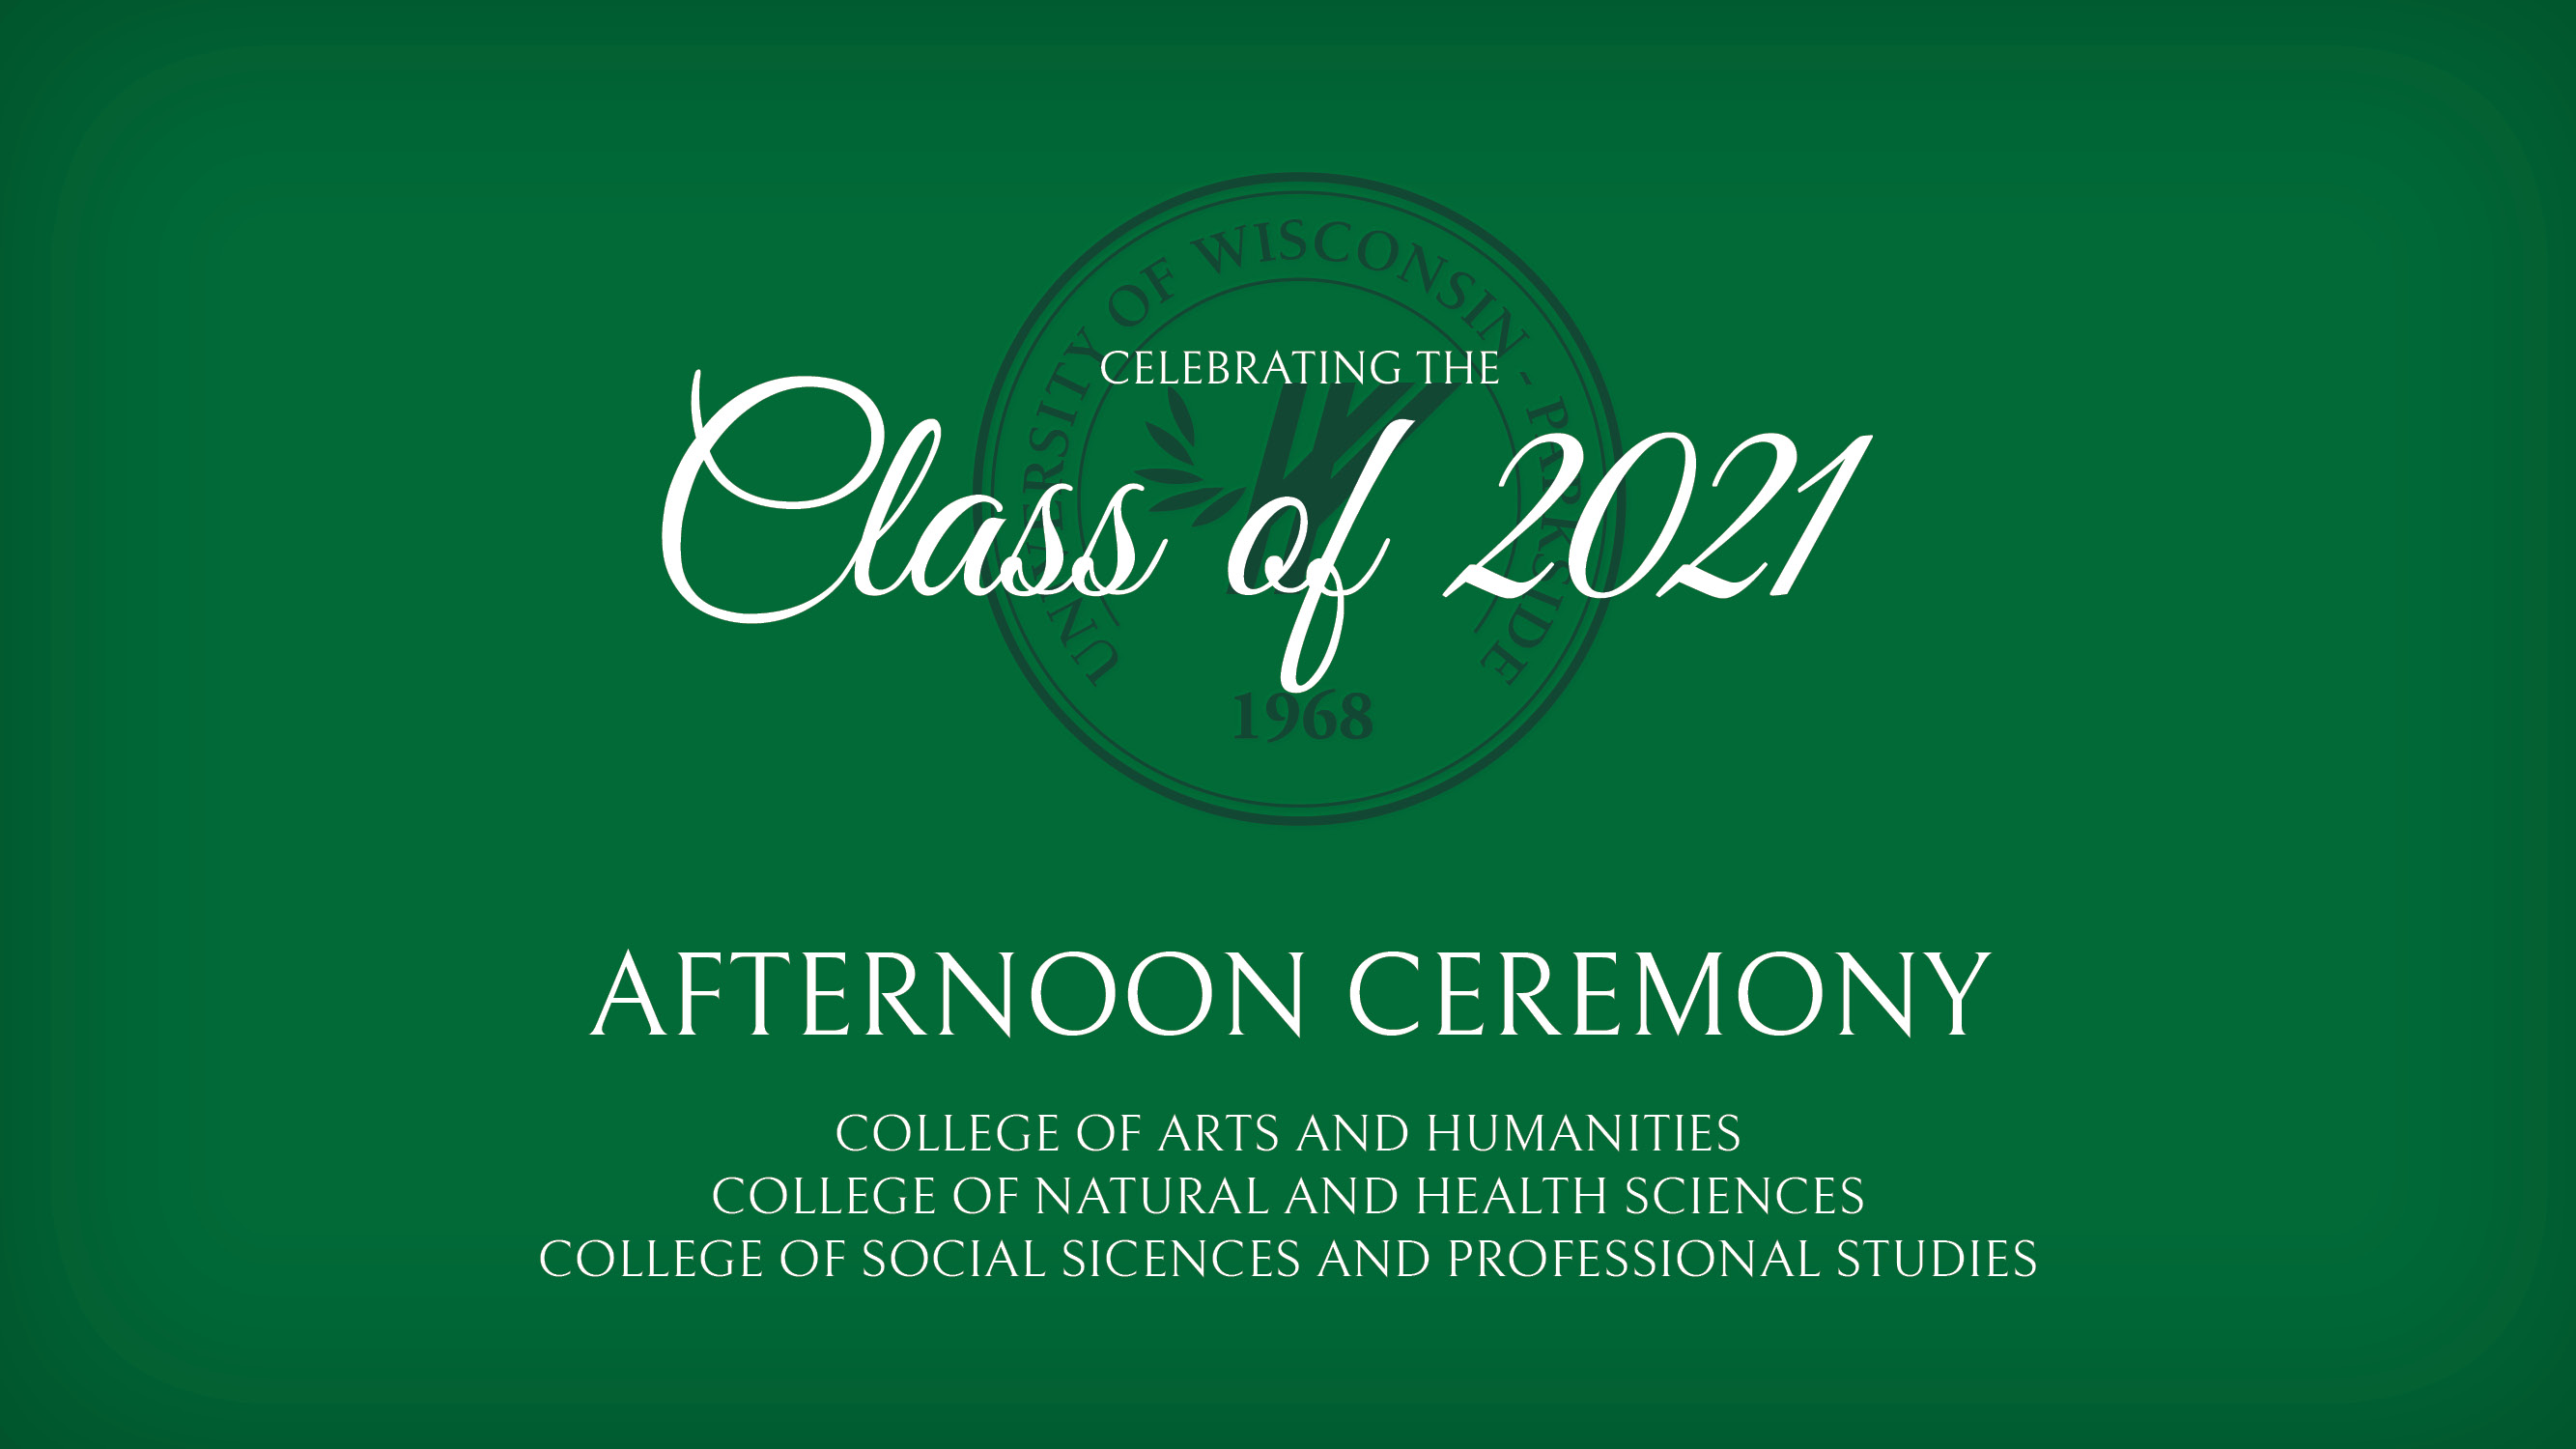 Dec 21 Commencement Ceremony (Afternoon)